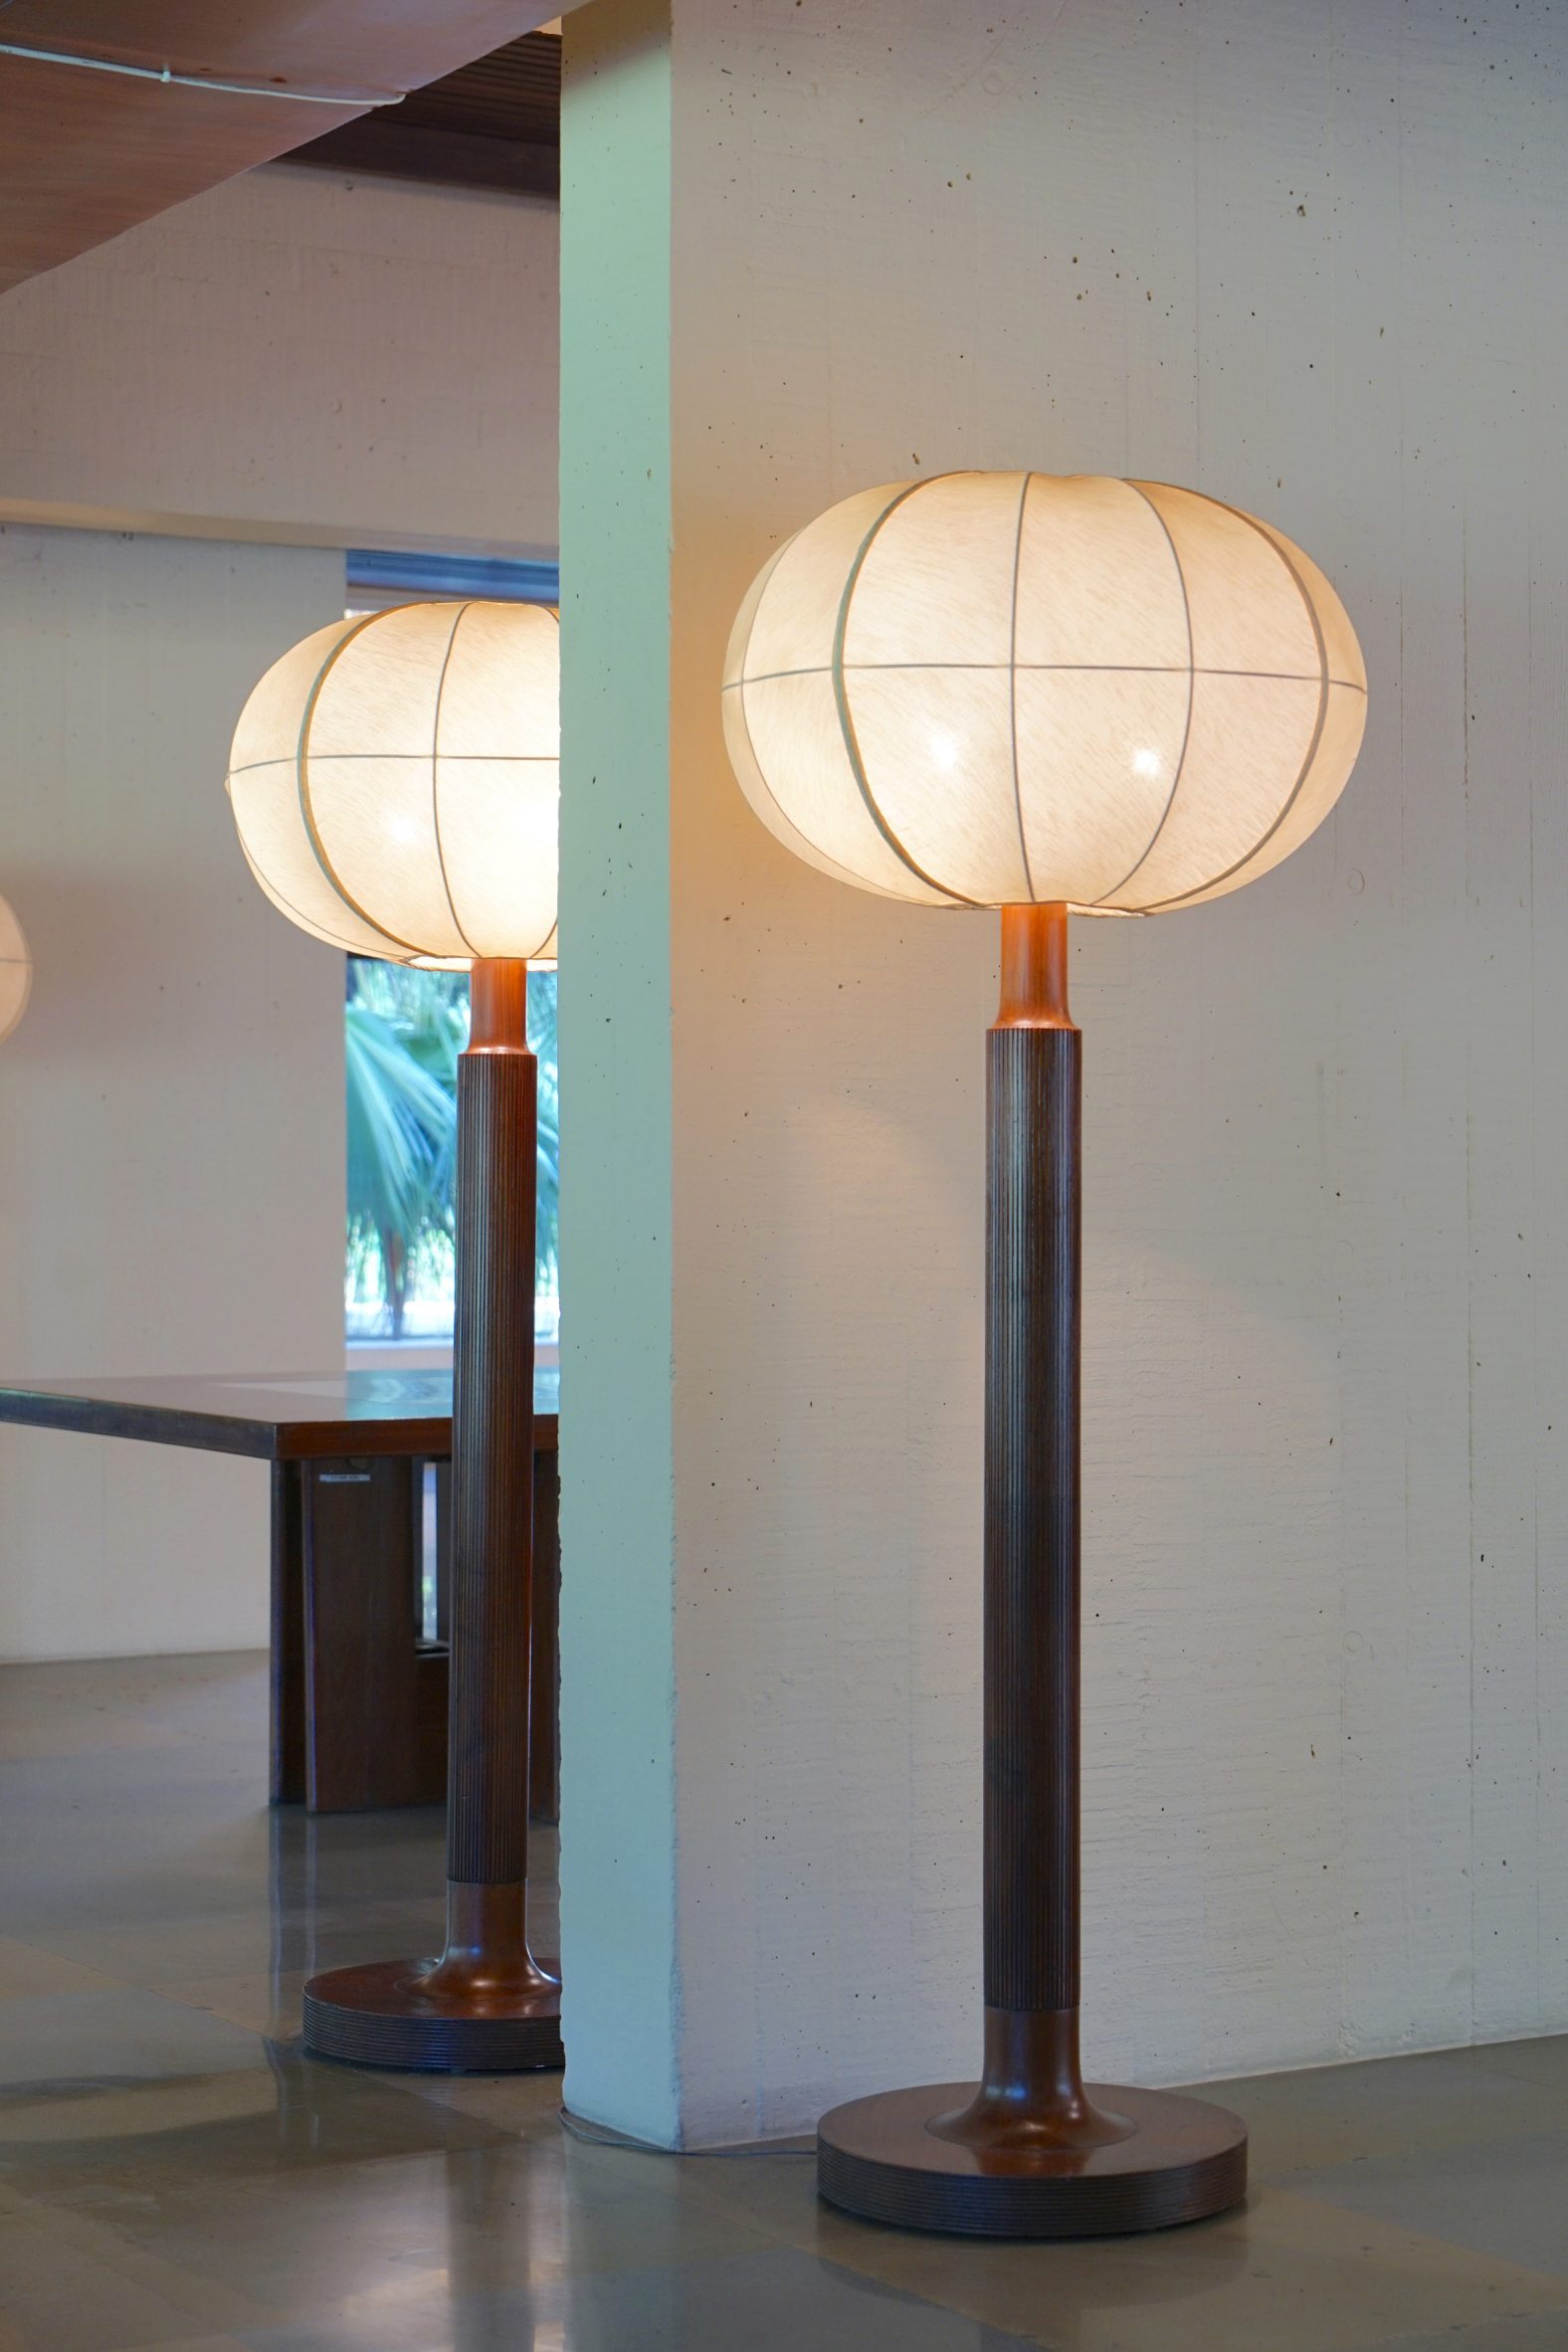 Wooden lamp with balloon shade